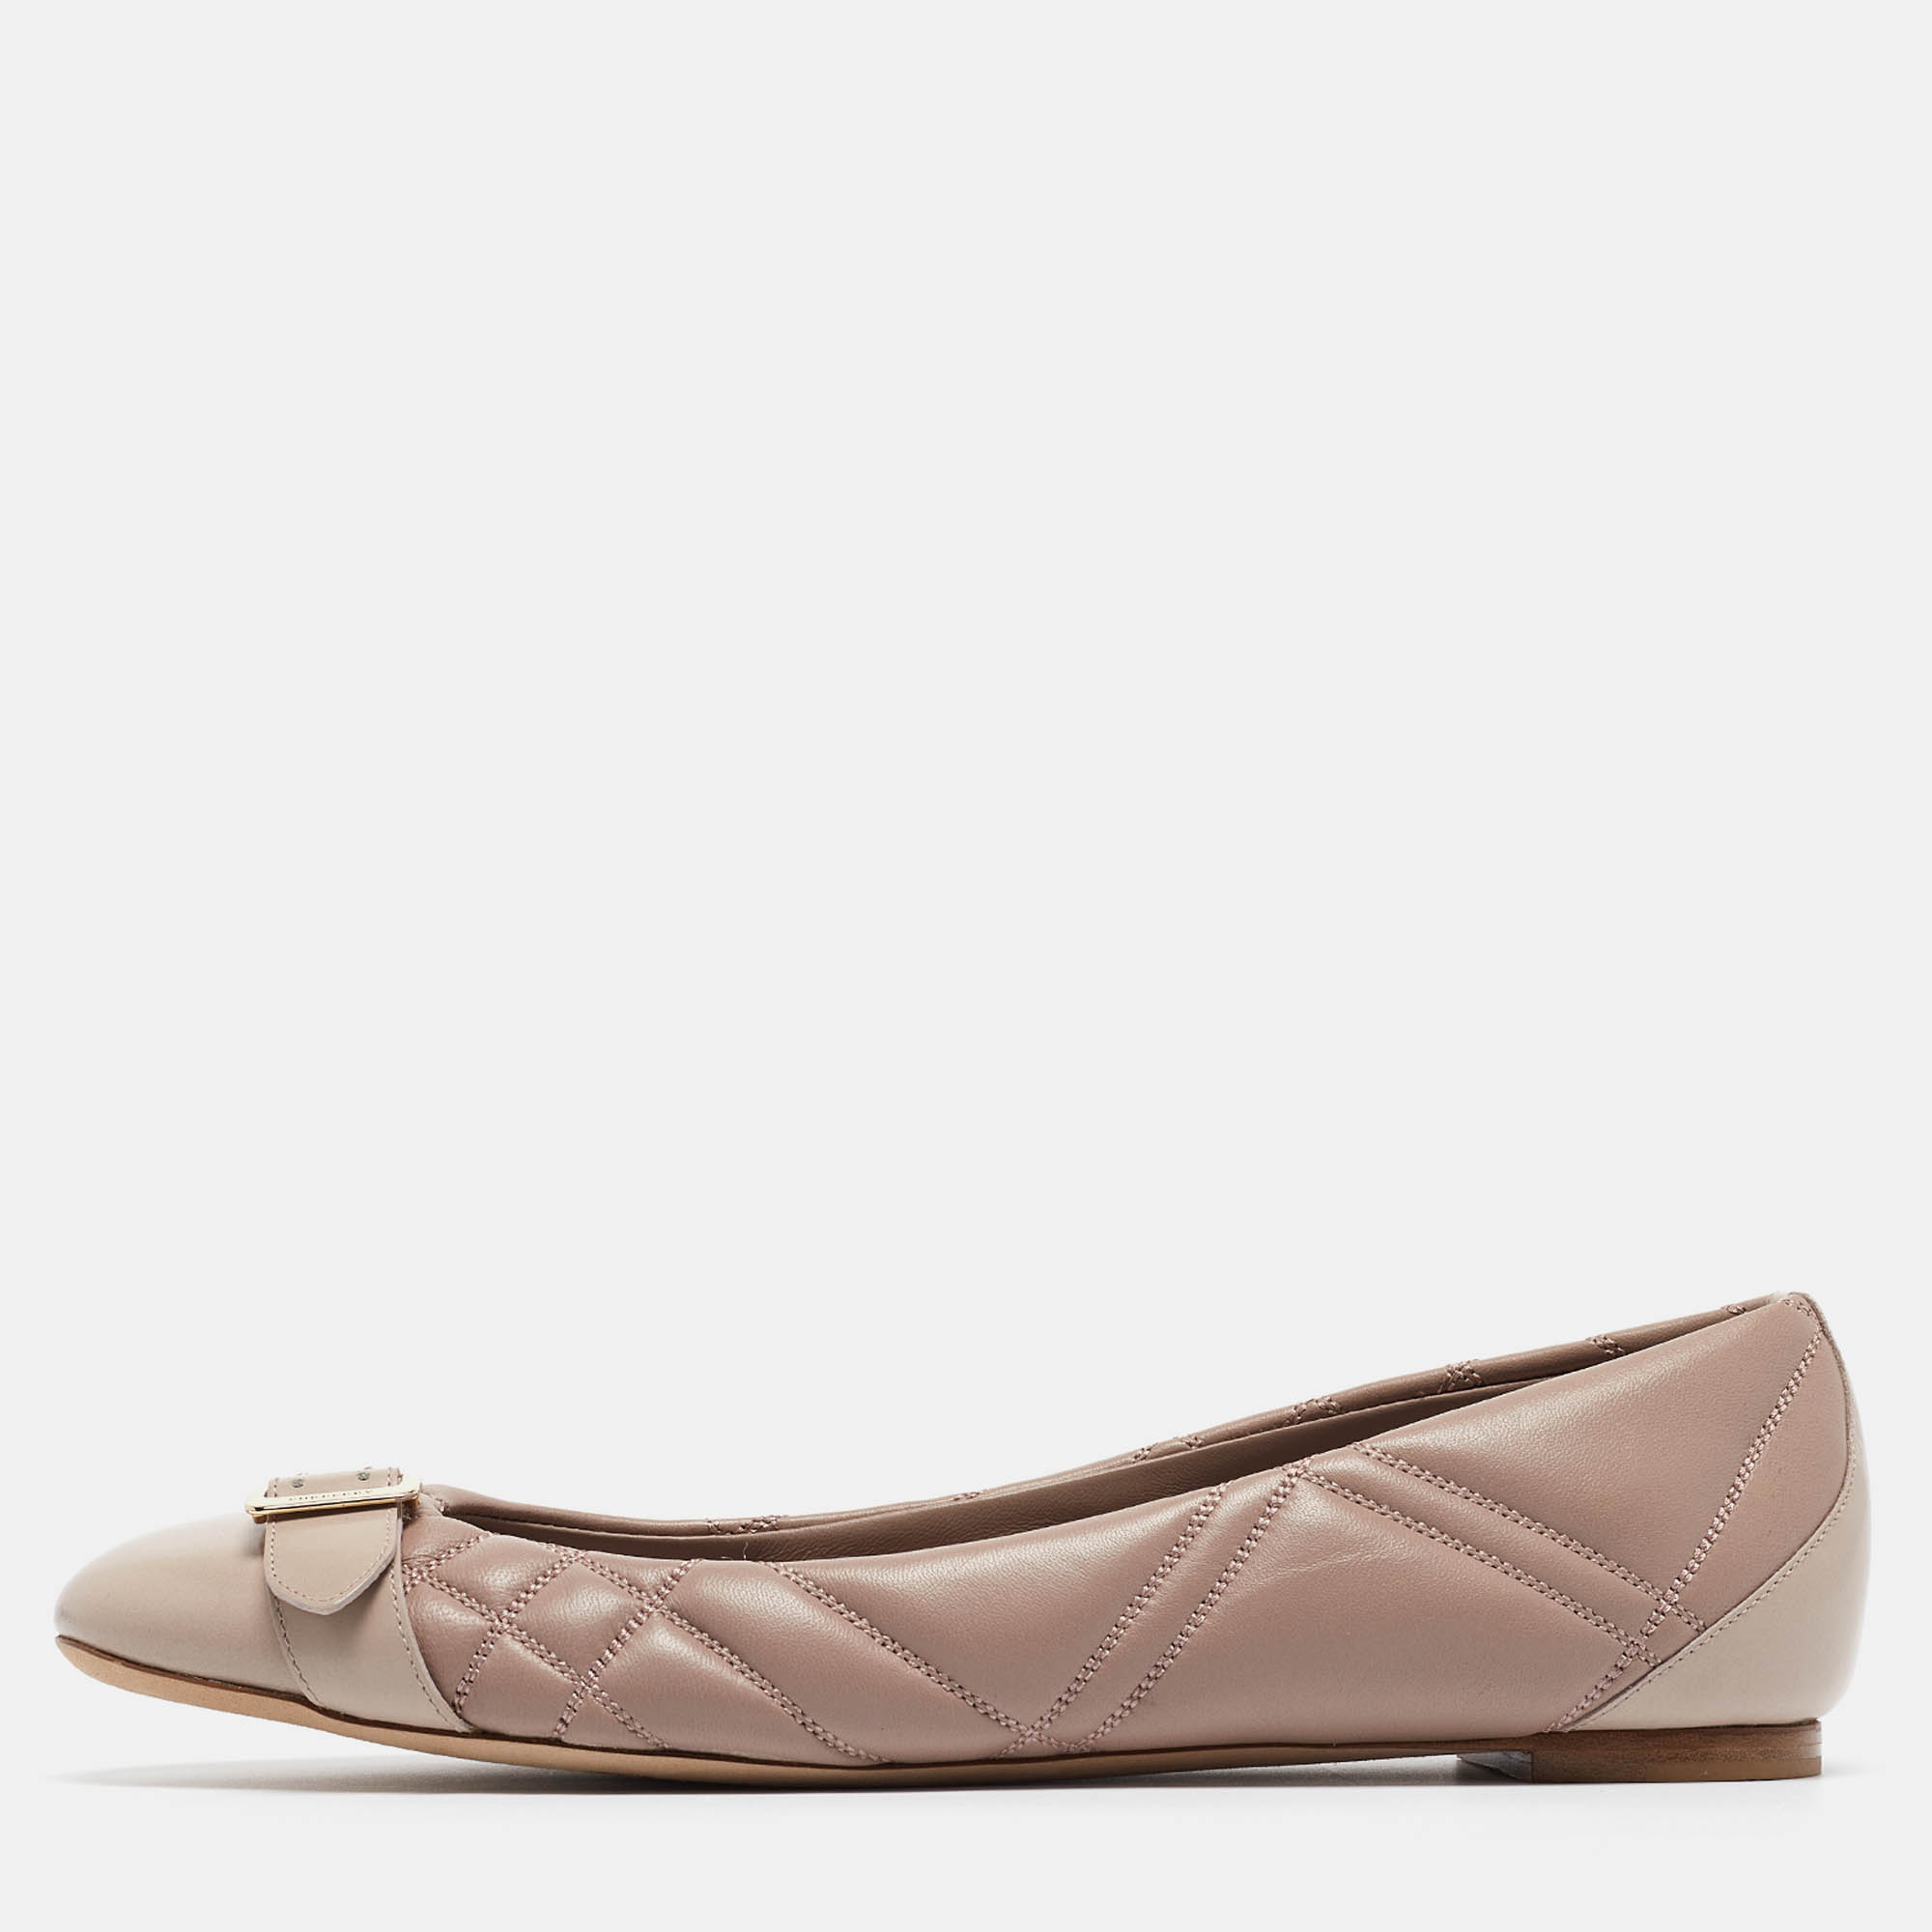 

Burberry Dusty Pink Quilted Leather Buckle Detail Ballet Flats Size